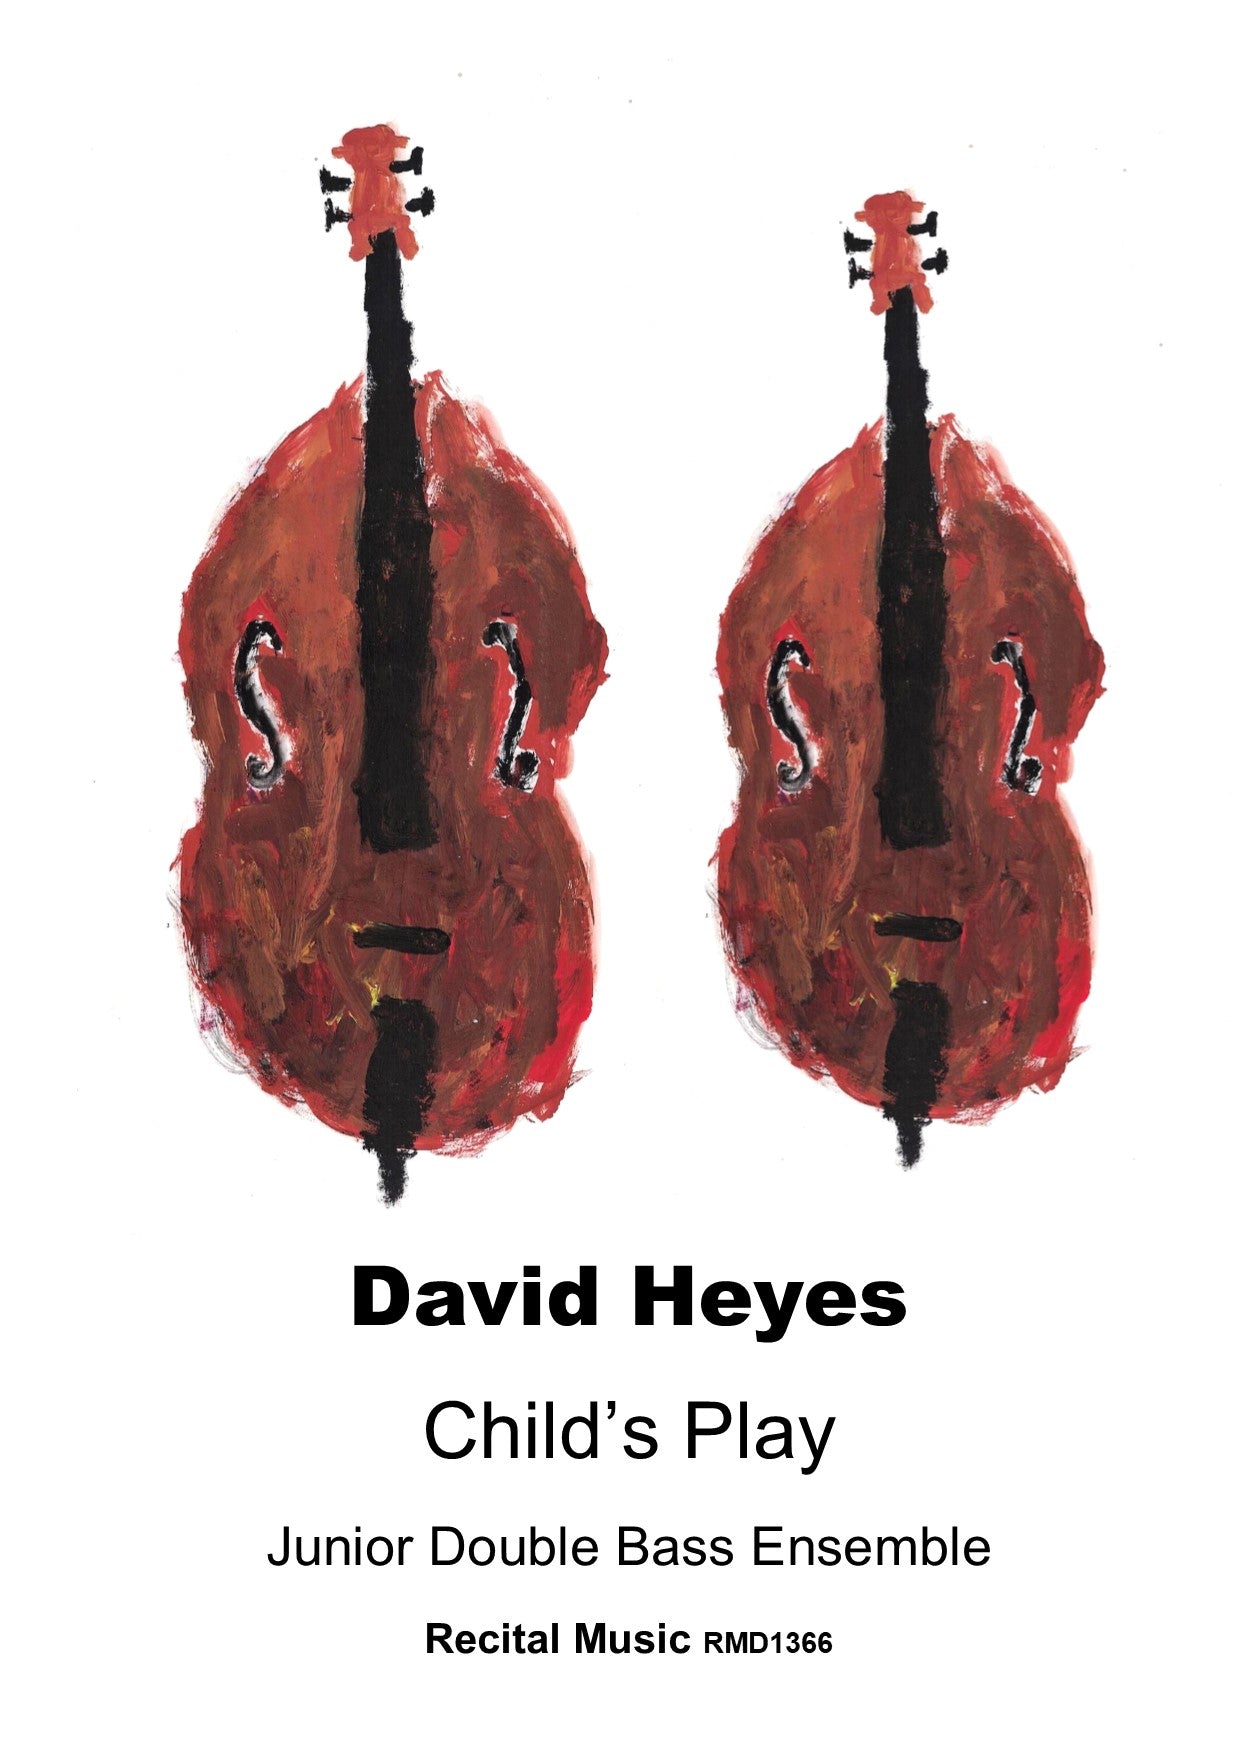 David Heyes: Child's Play for Junior Double Bass Ensemble (any number of players)